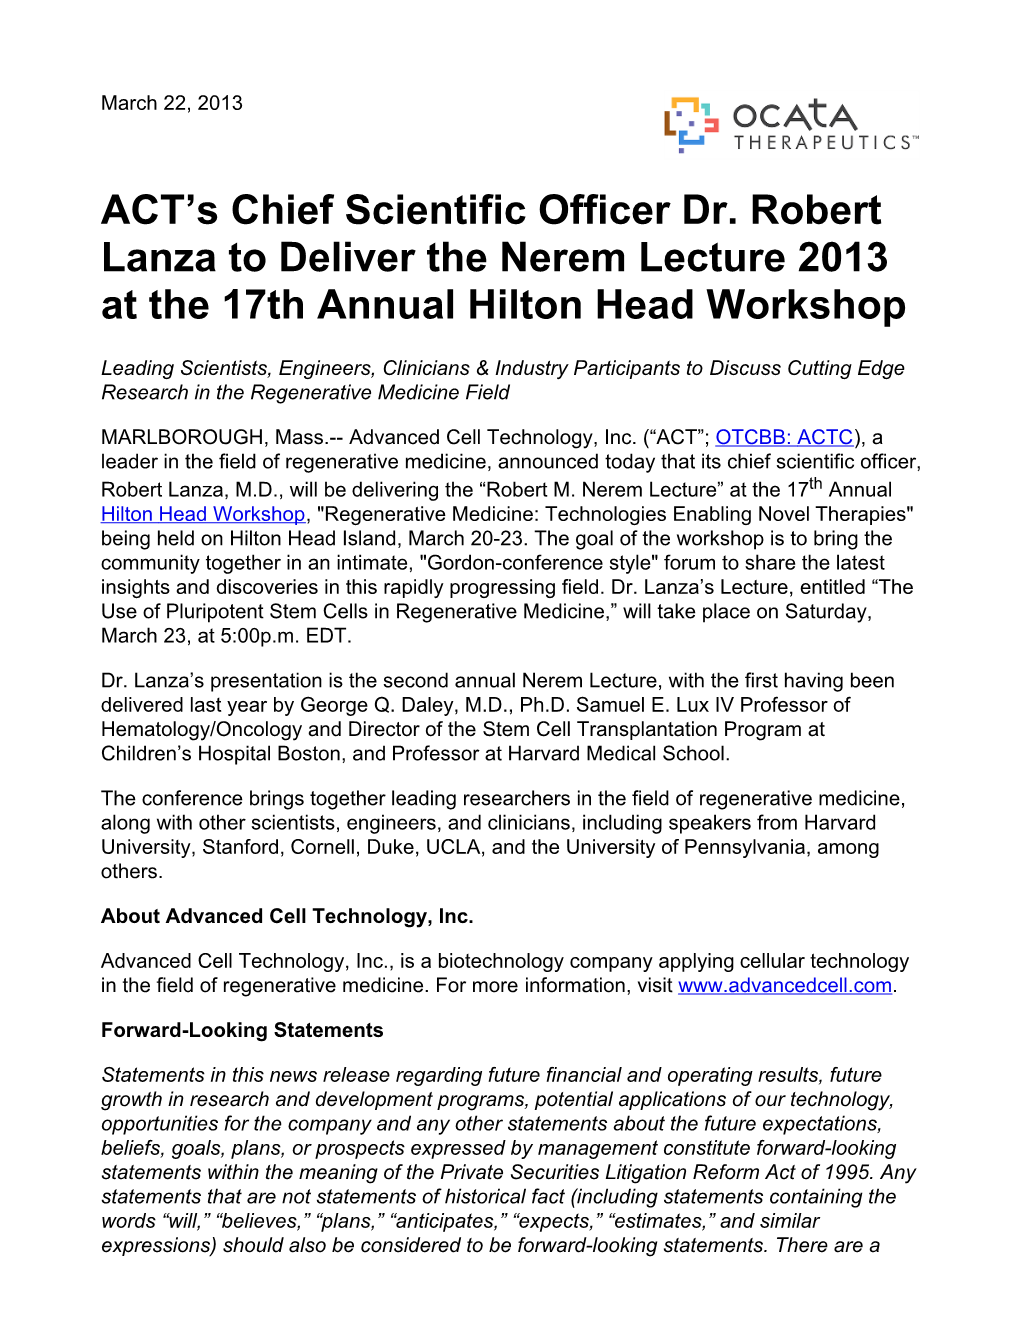 ACT's Chief Scientific Officer Dr. Robert Lanza to Deliver